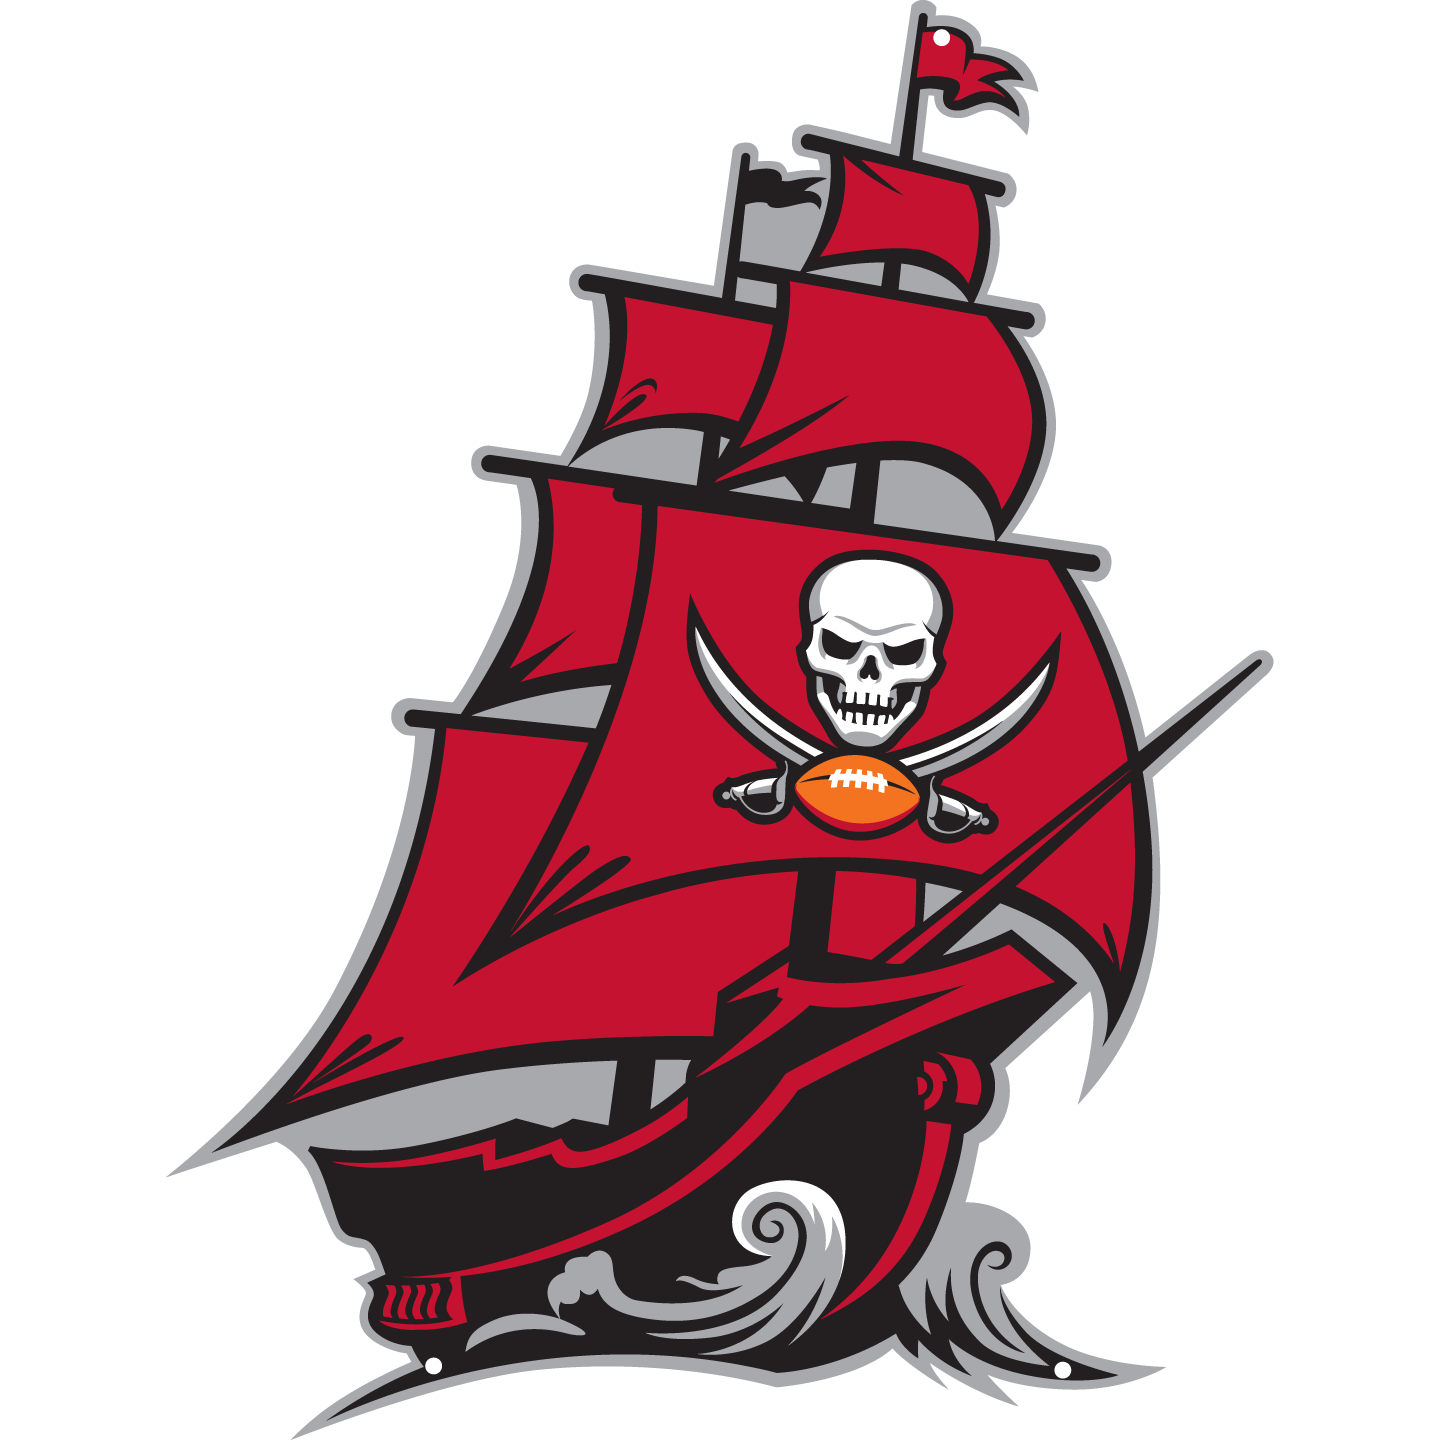 Tampa Bay Buccaneers - Pirate Ship 24' Statement Size Steel Laser